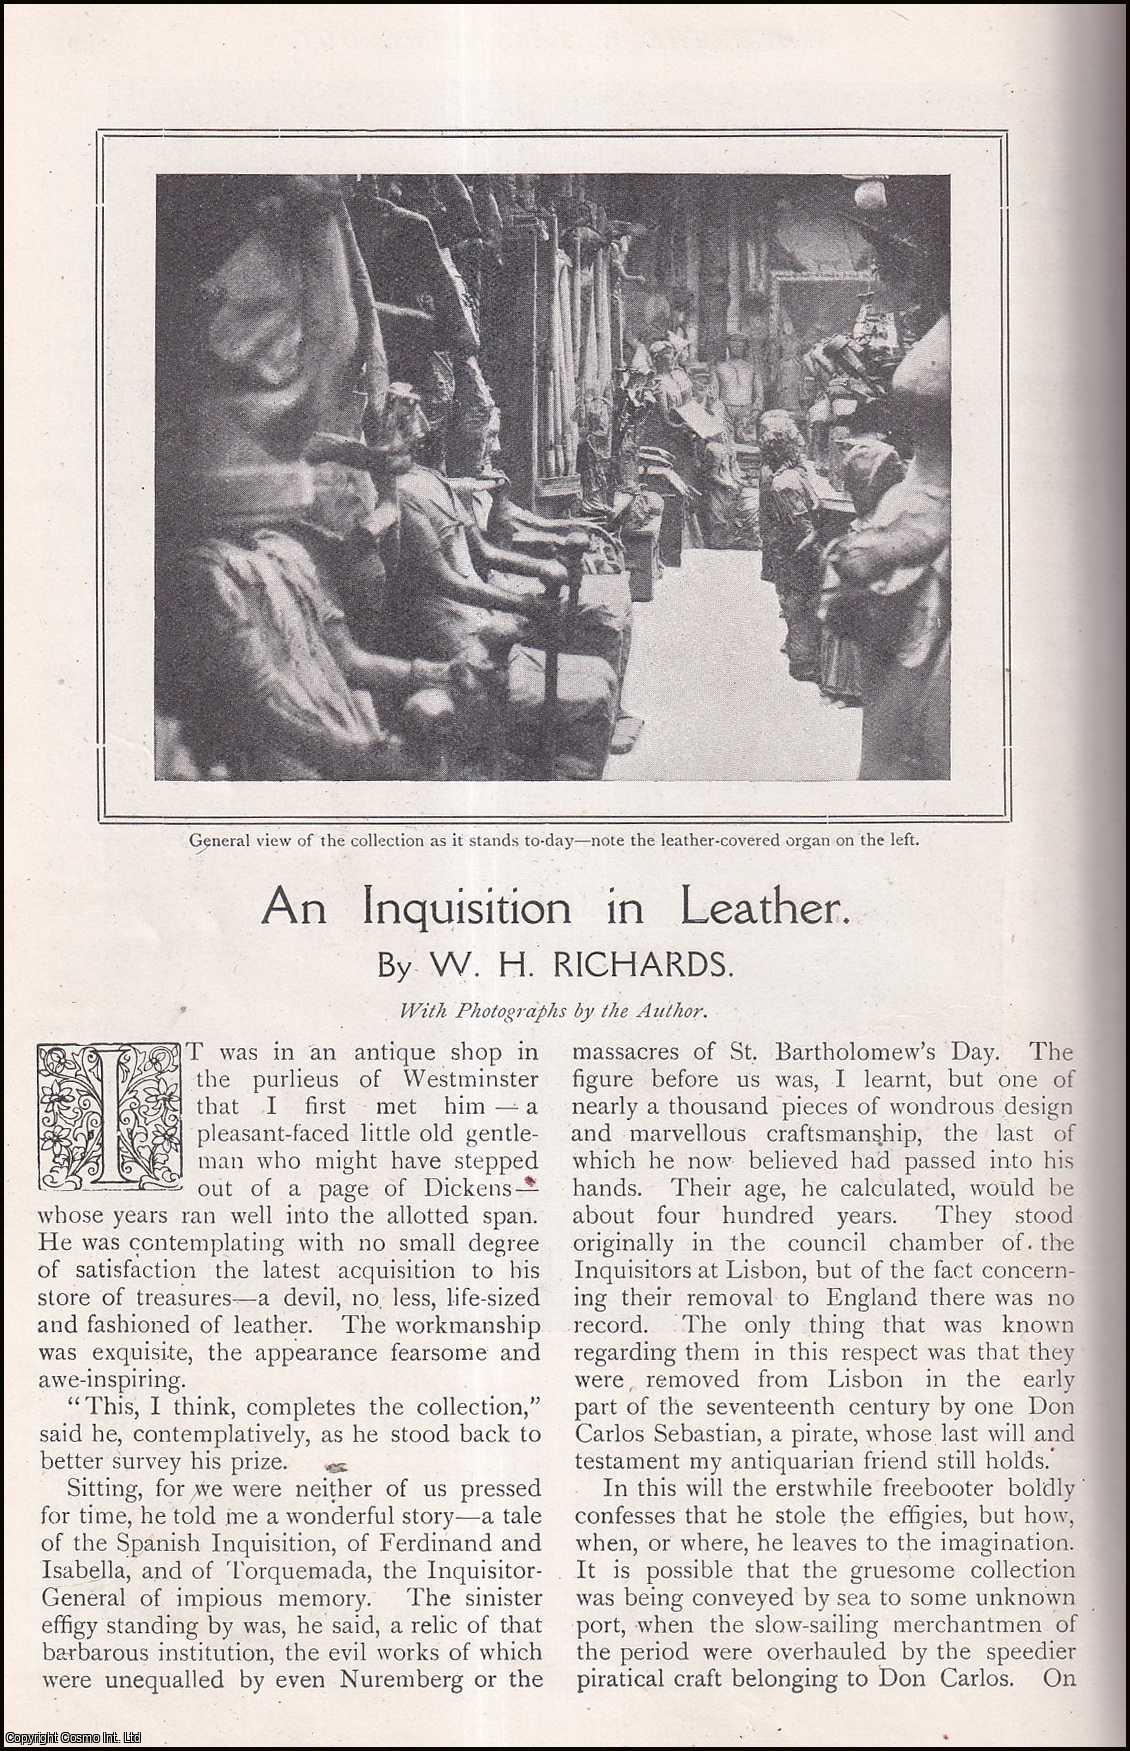 W.H. Richards - An Inquisition in Leather. Leatherwork from the Spanish Inquisition & of Torquemada. An uncommon original article from The Strand Magazine, 1908.